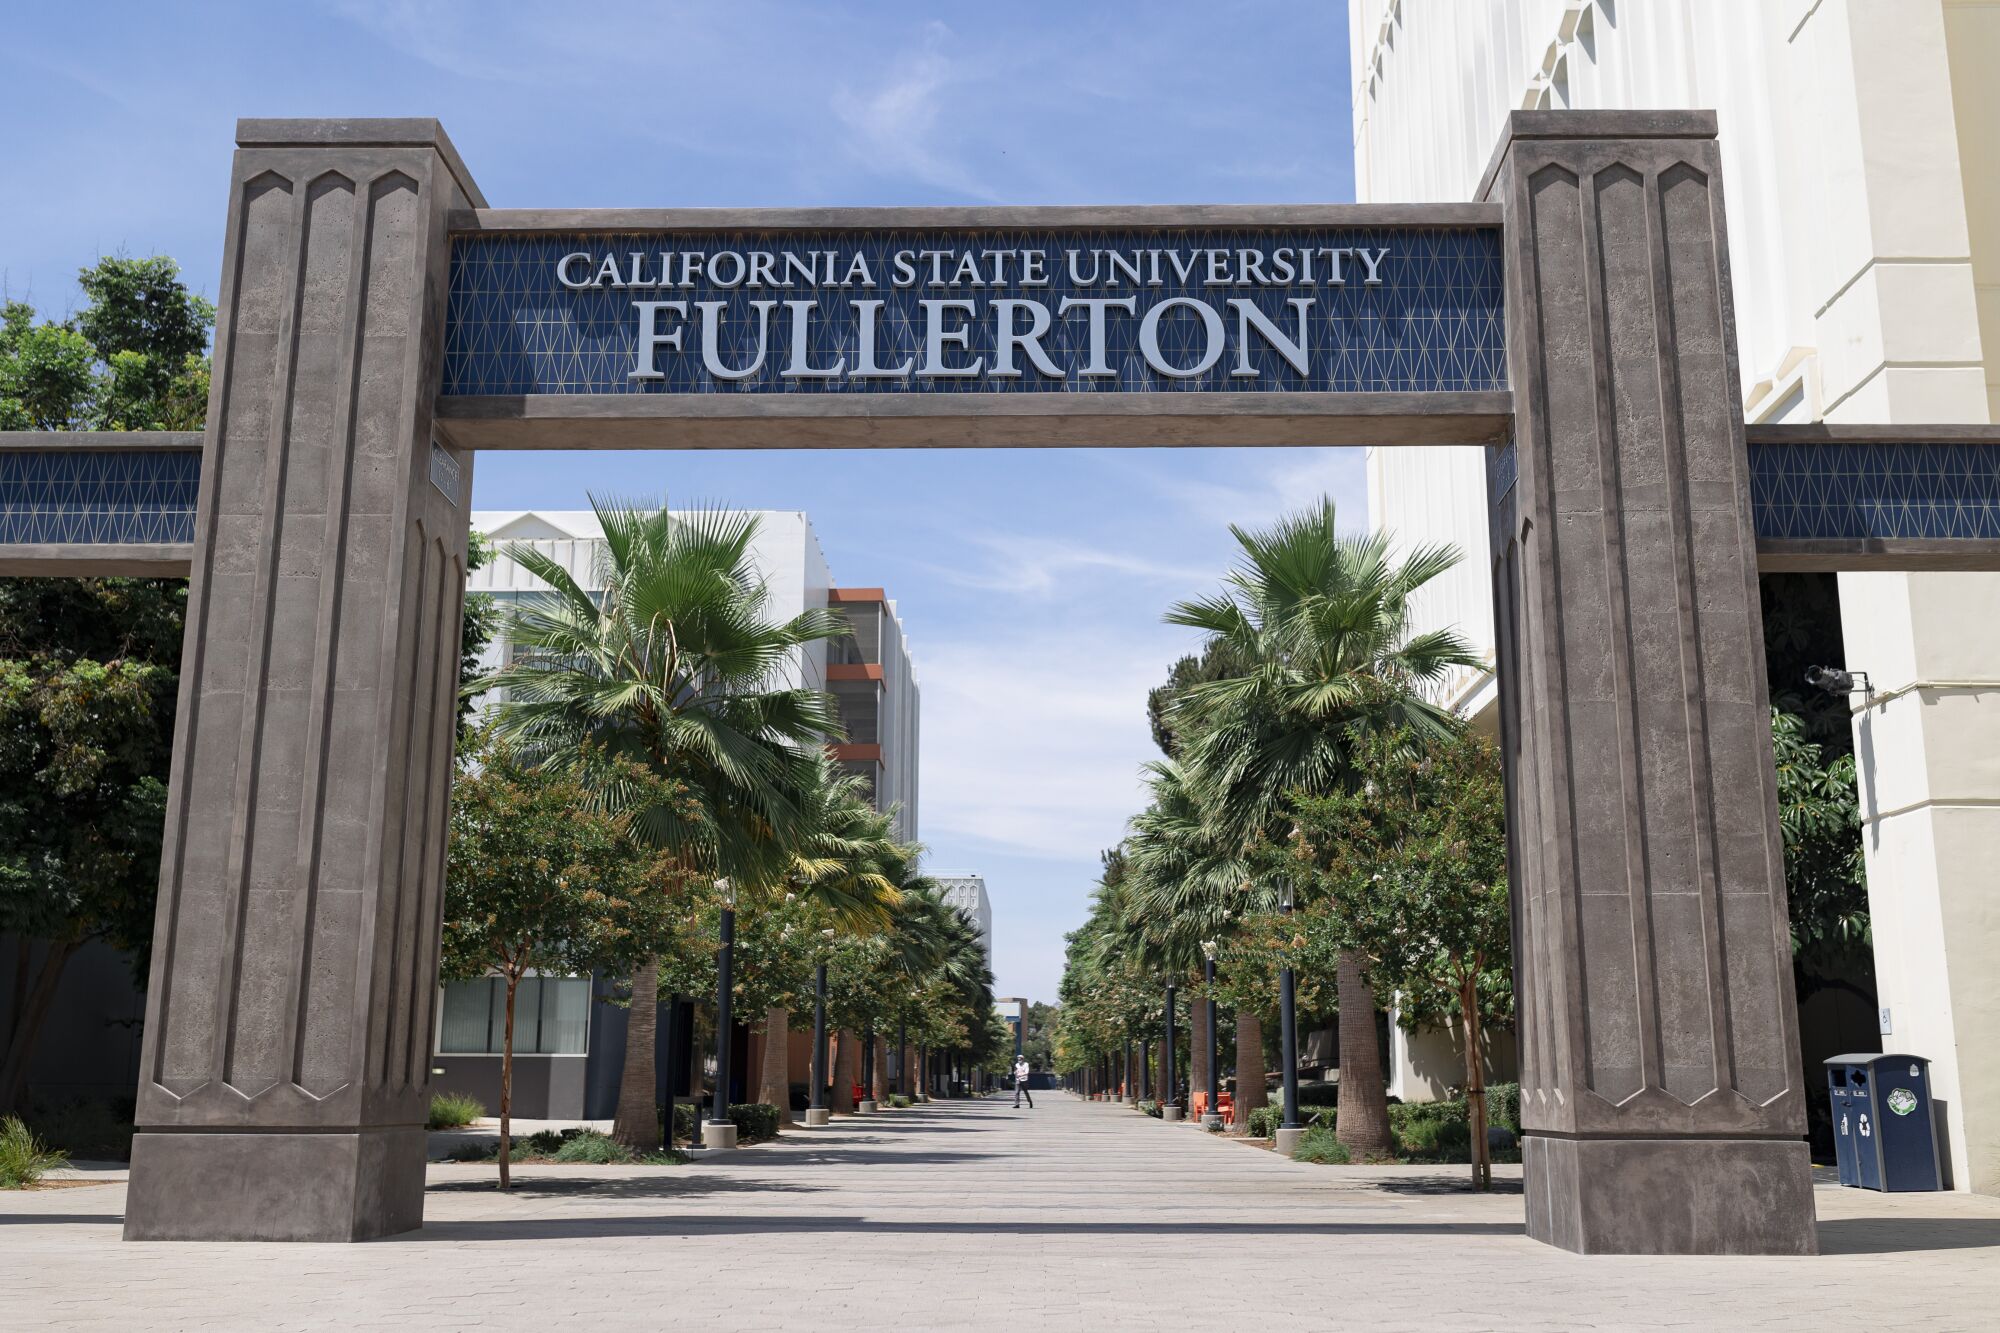 Entrance to Cal State Fullerton